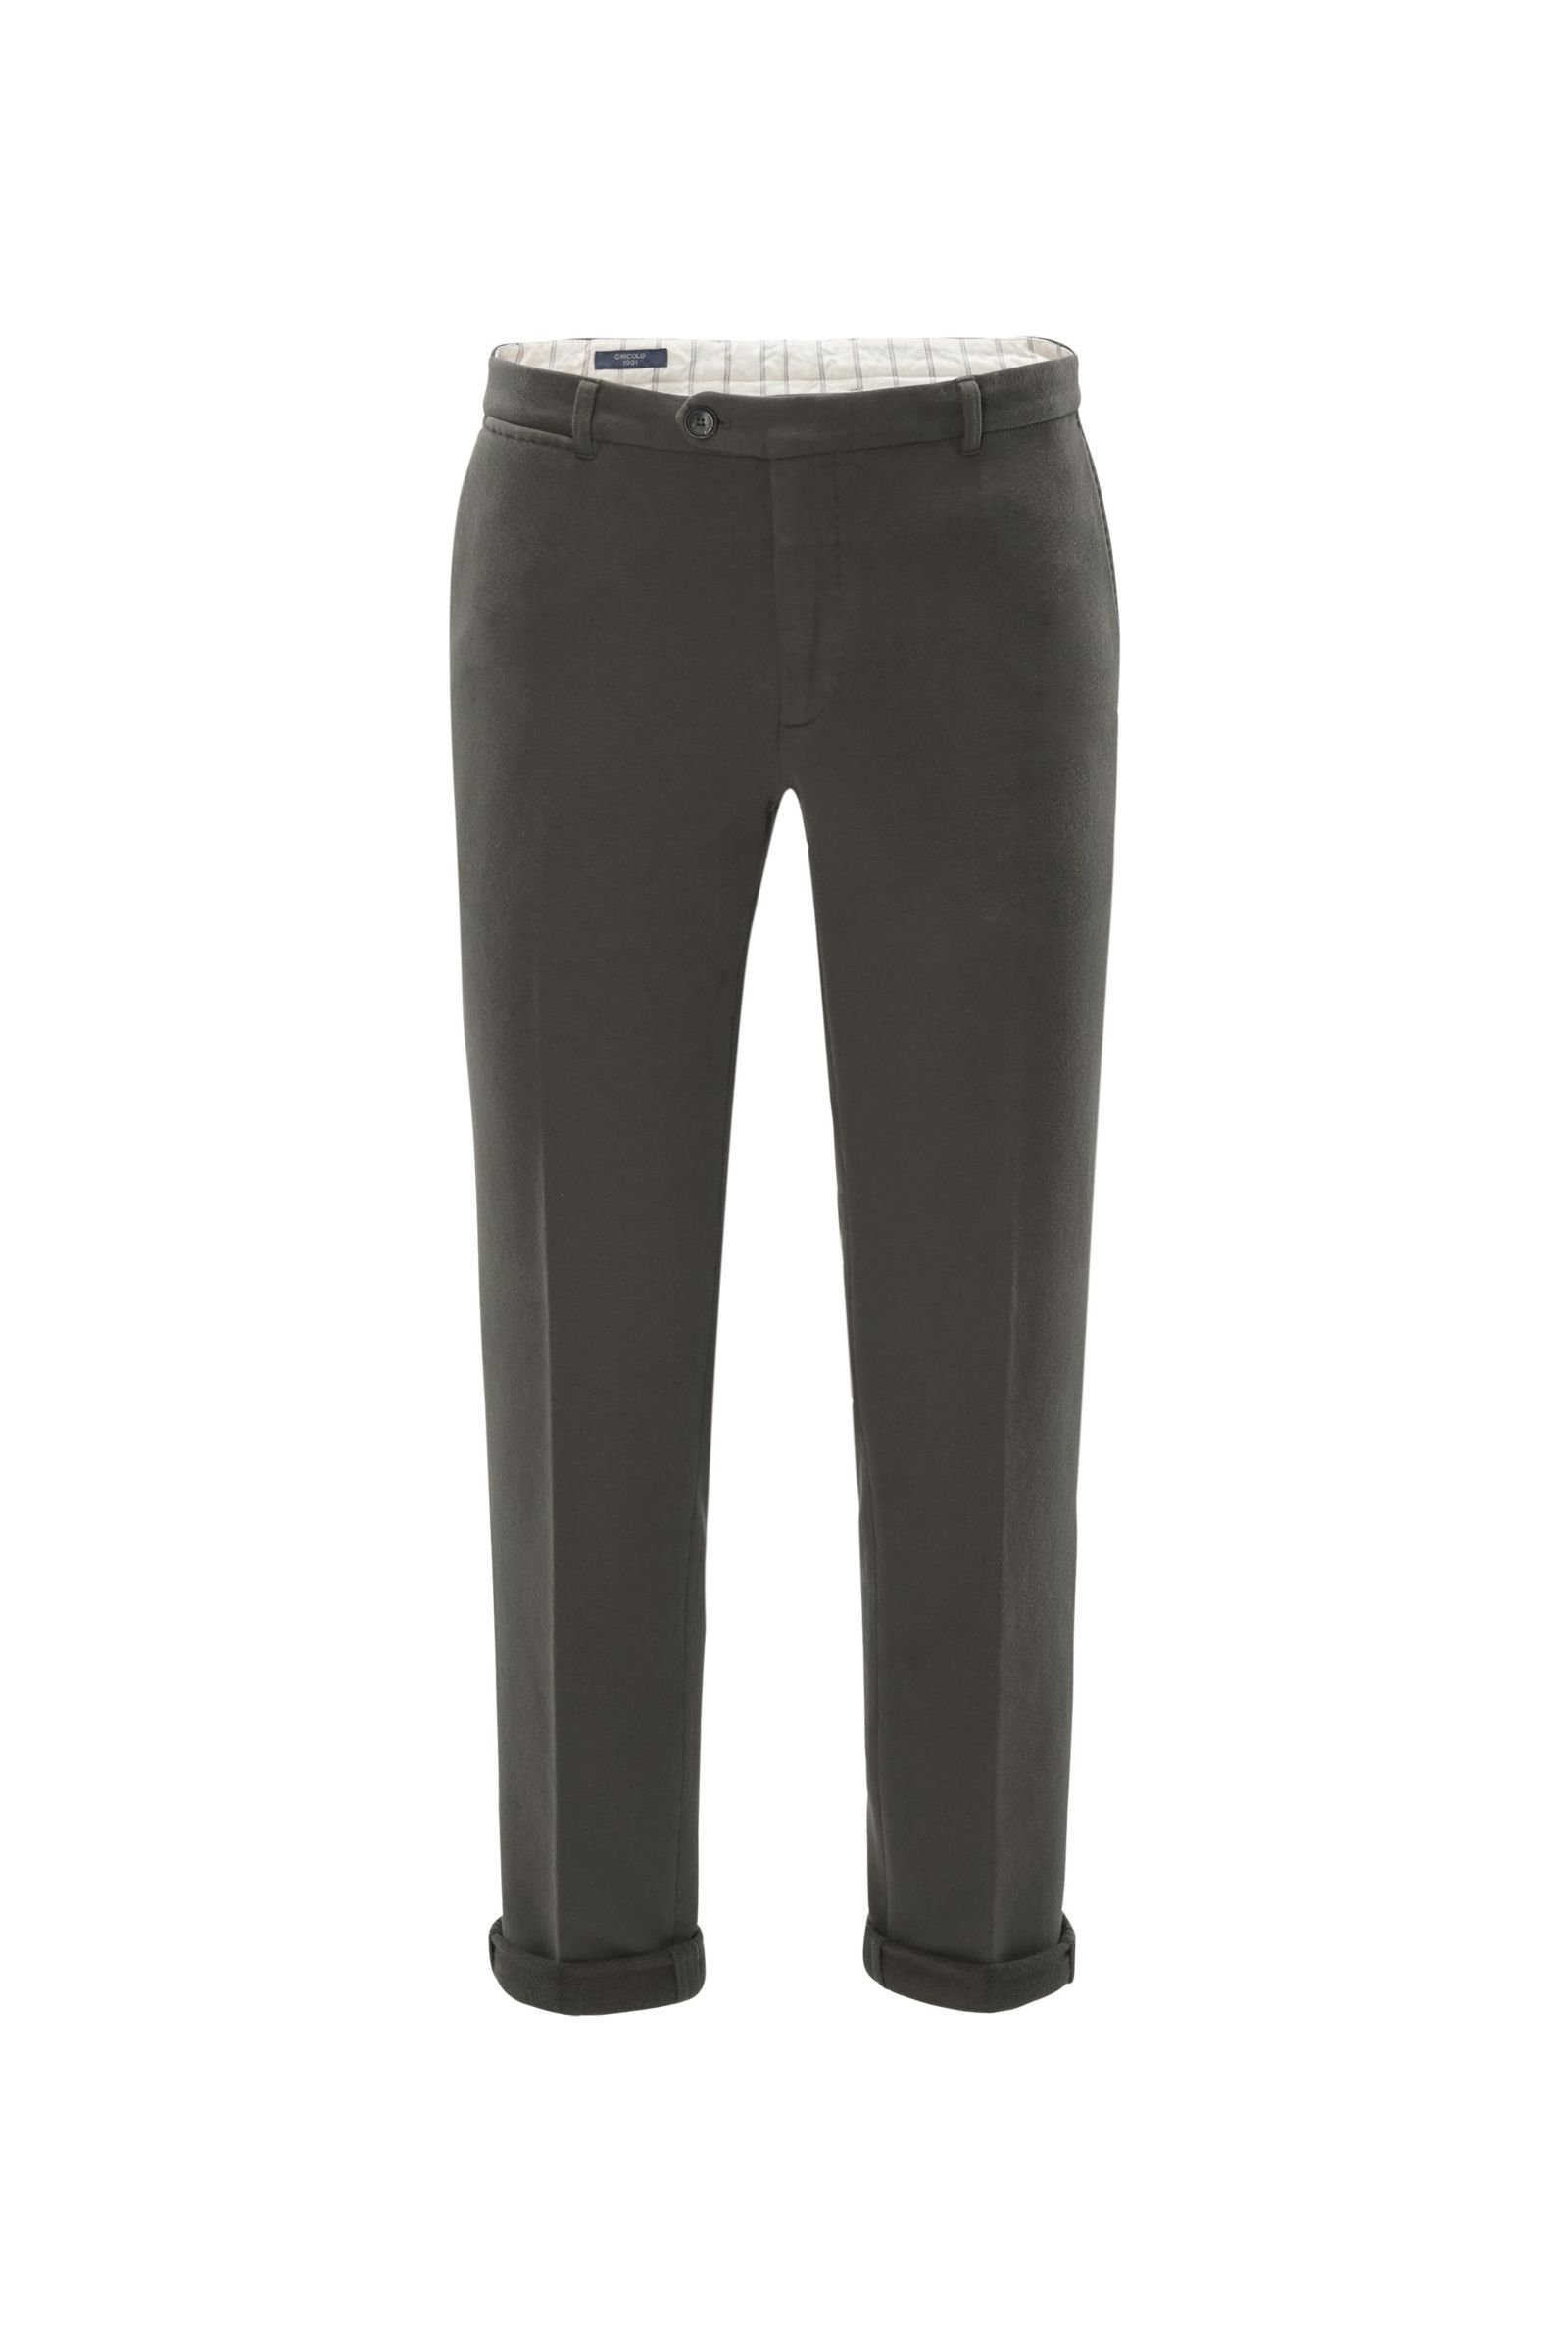 Jersey trousers grey-brown